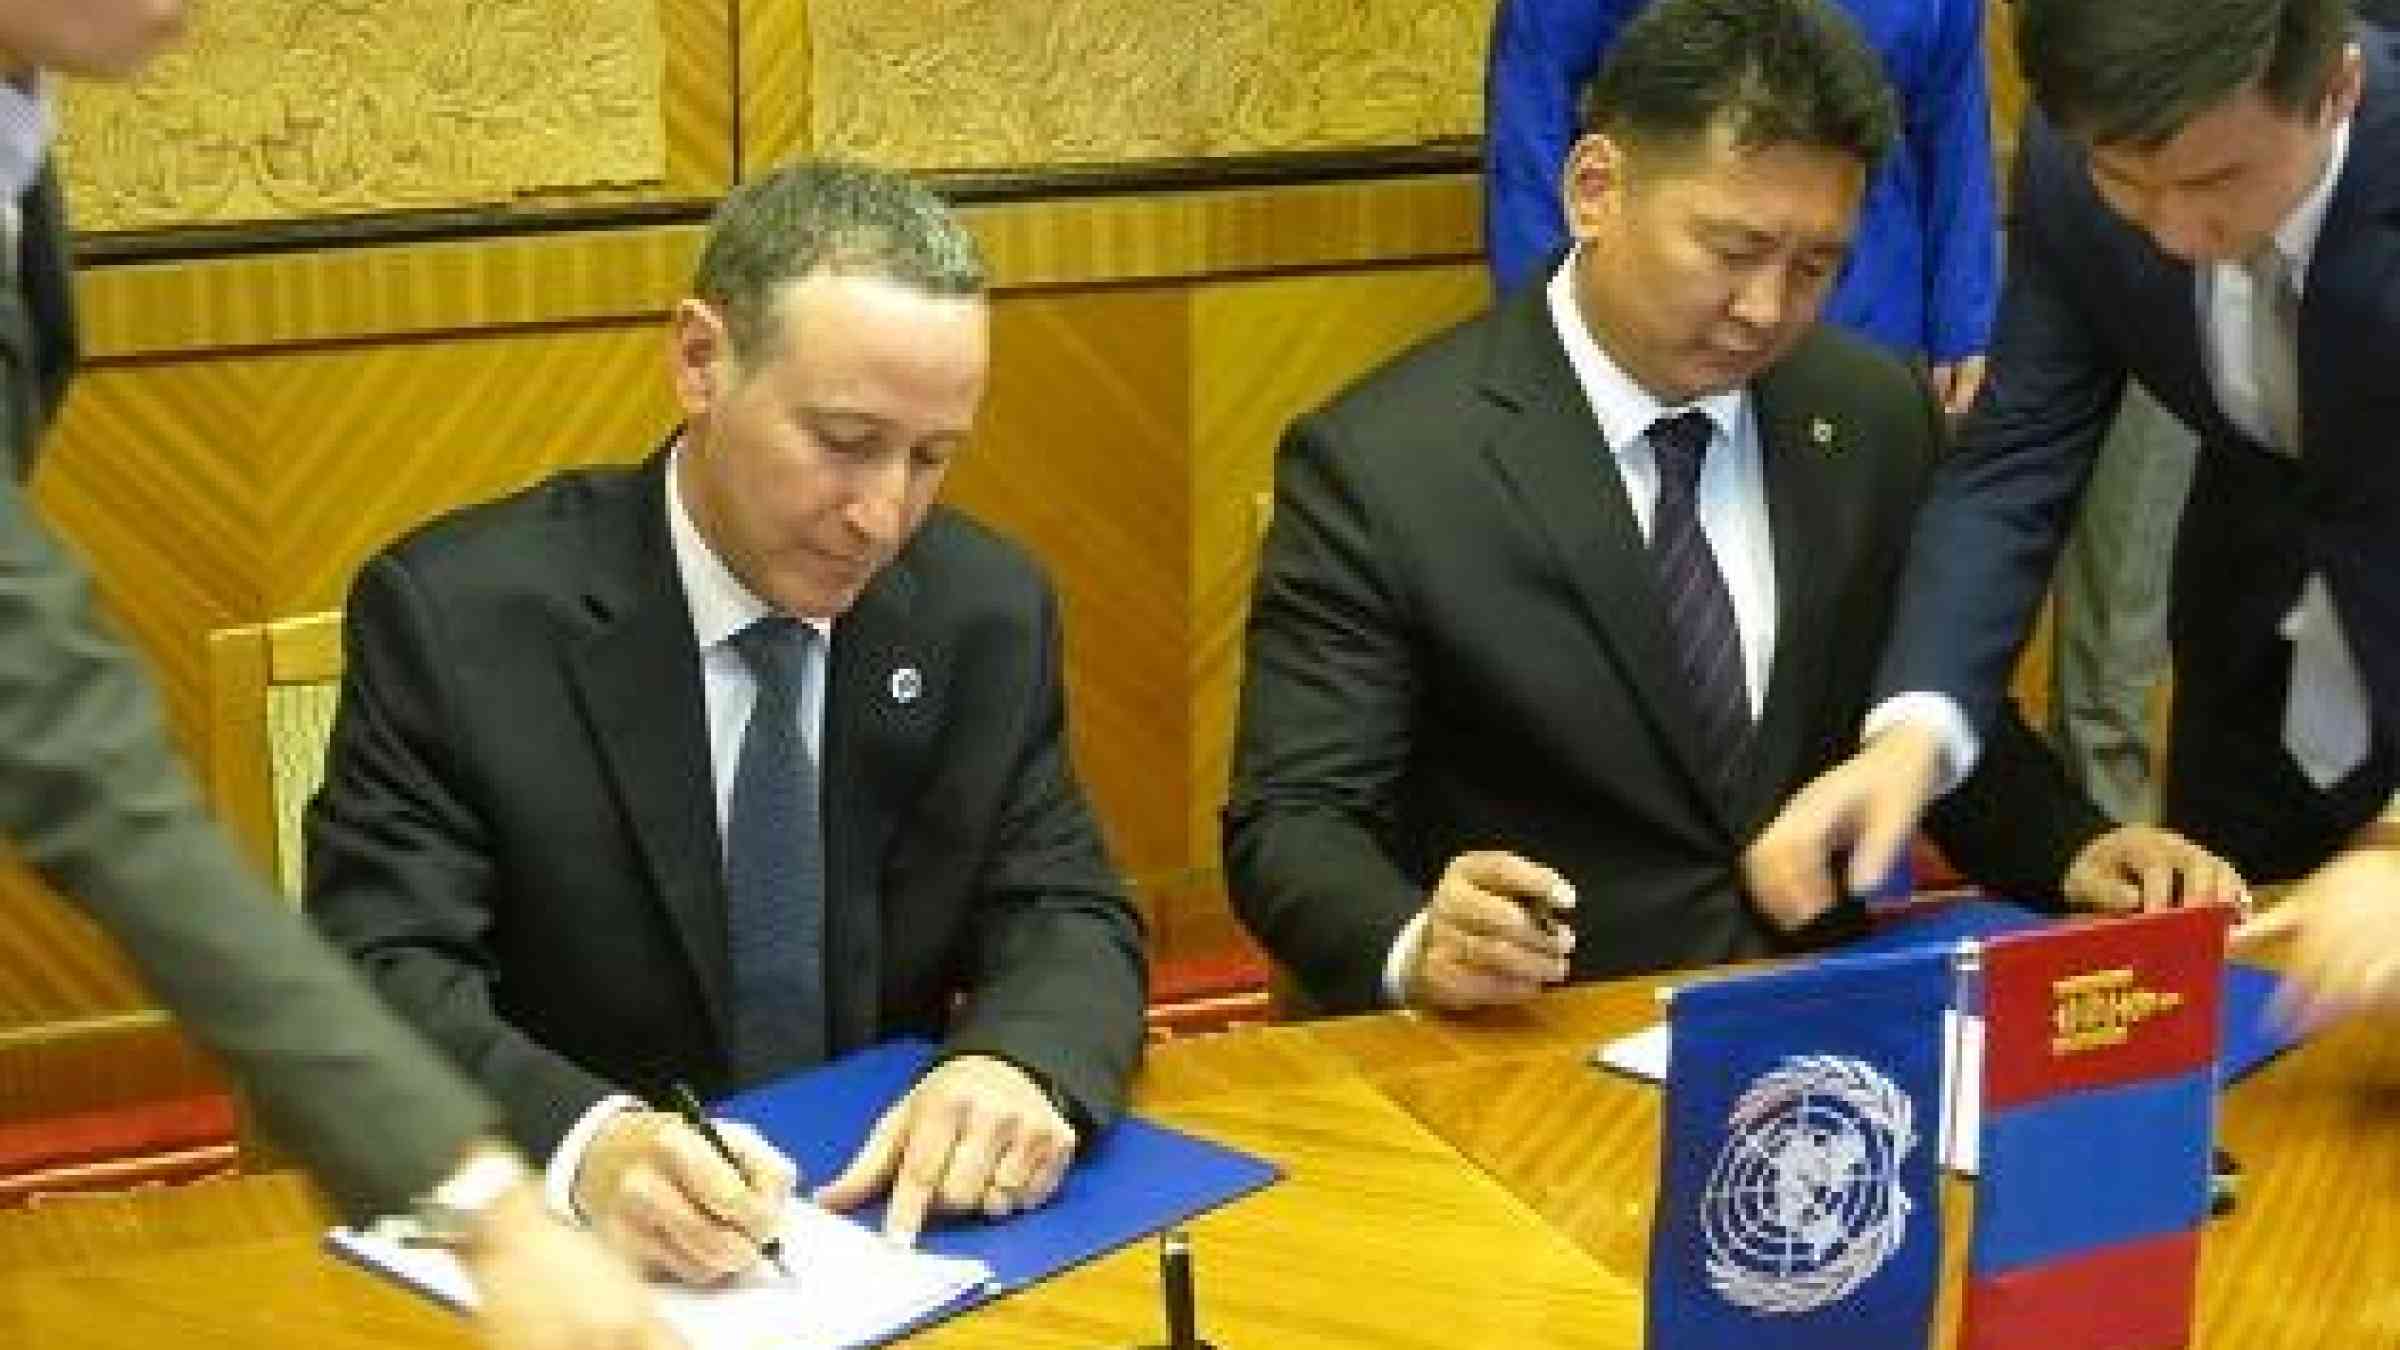 The Deputy Prime Minister of Mongolia, Mr. Khurelsukh Ukhnaa (right) and Mr. Robert Glasser, Special Representative of the UN Secretary-General for Disaster Risk Reduction, sign the Statement of Cooperation to co-organize the Asian Ministerial Conference on Disaster Risk Reduction in Ulaanbaatar in 2018 (Photo: UNISDR)